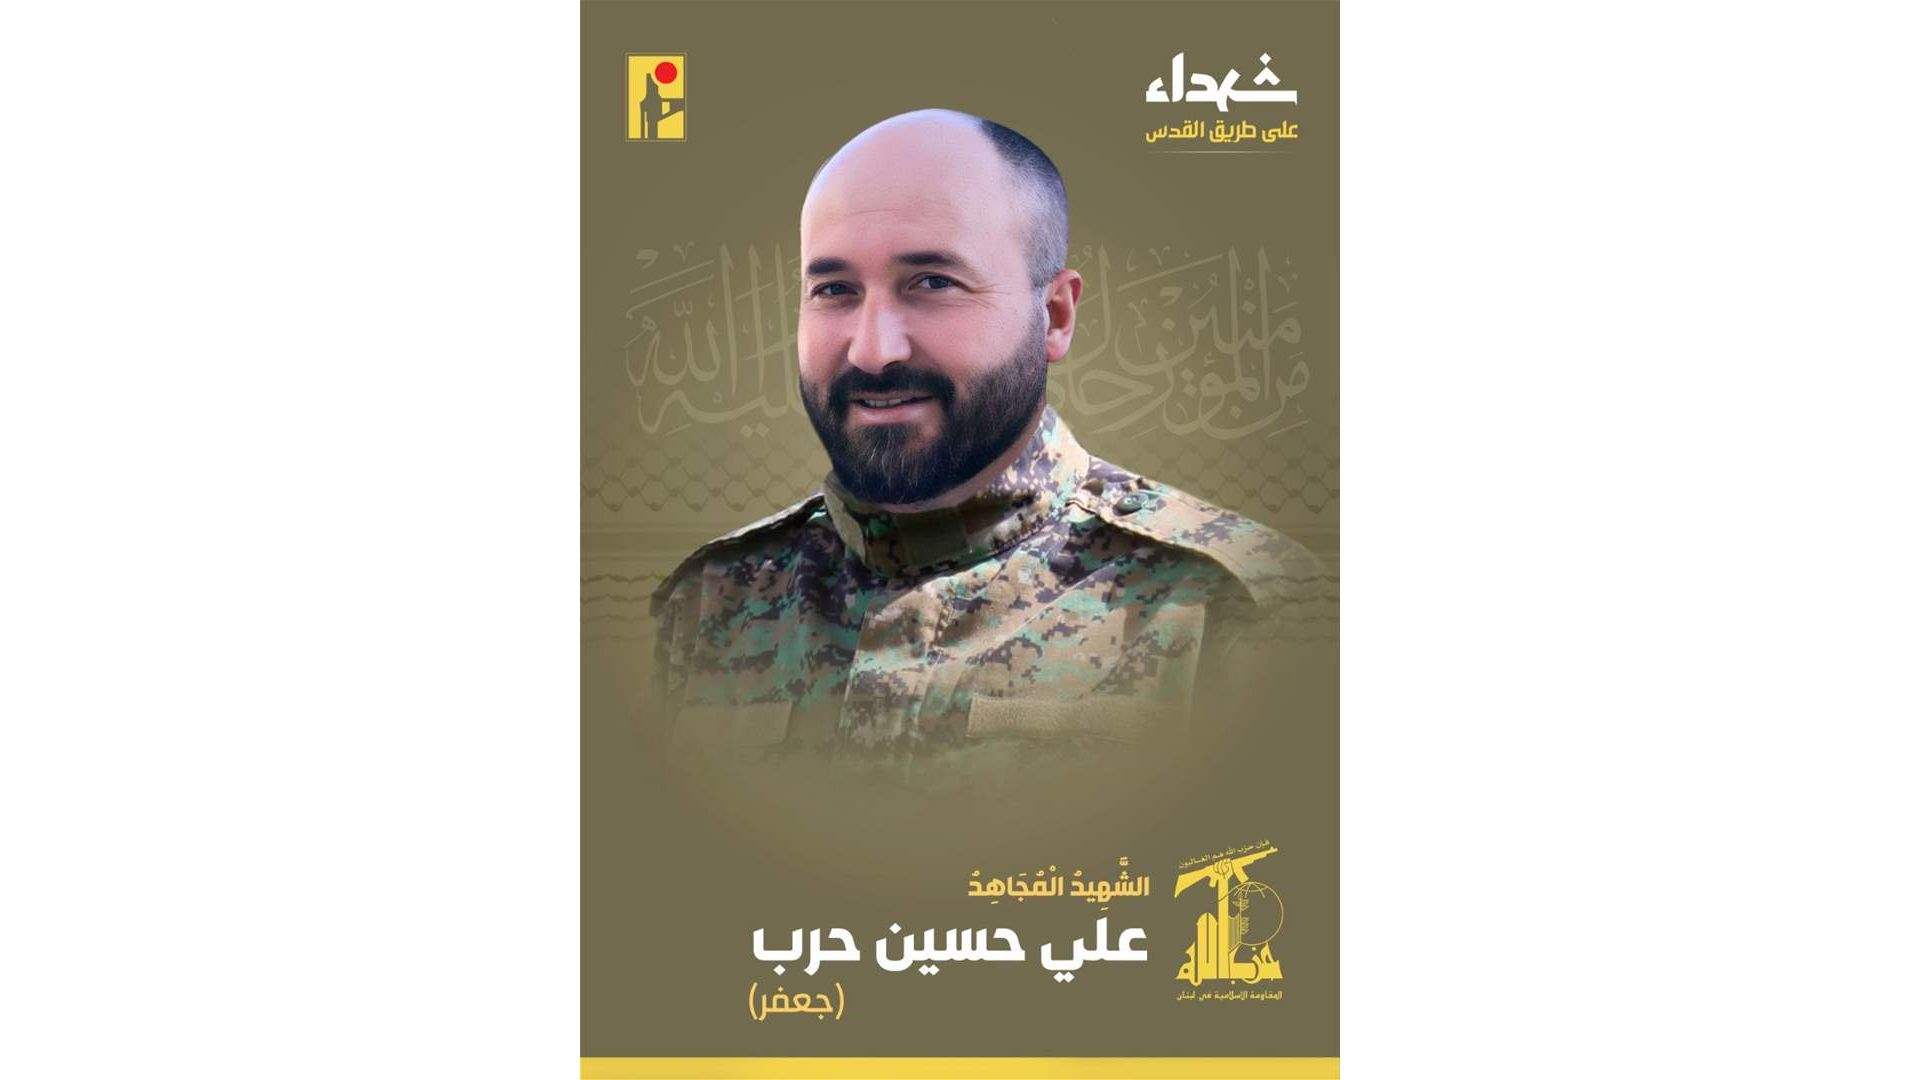 Hezbollah mourns the martyr Ali Hussein Hareb from Yaroun 